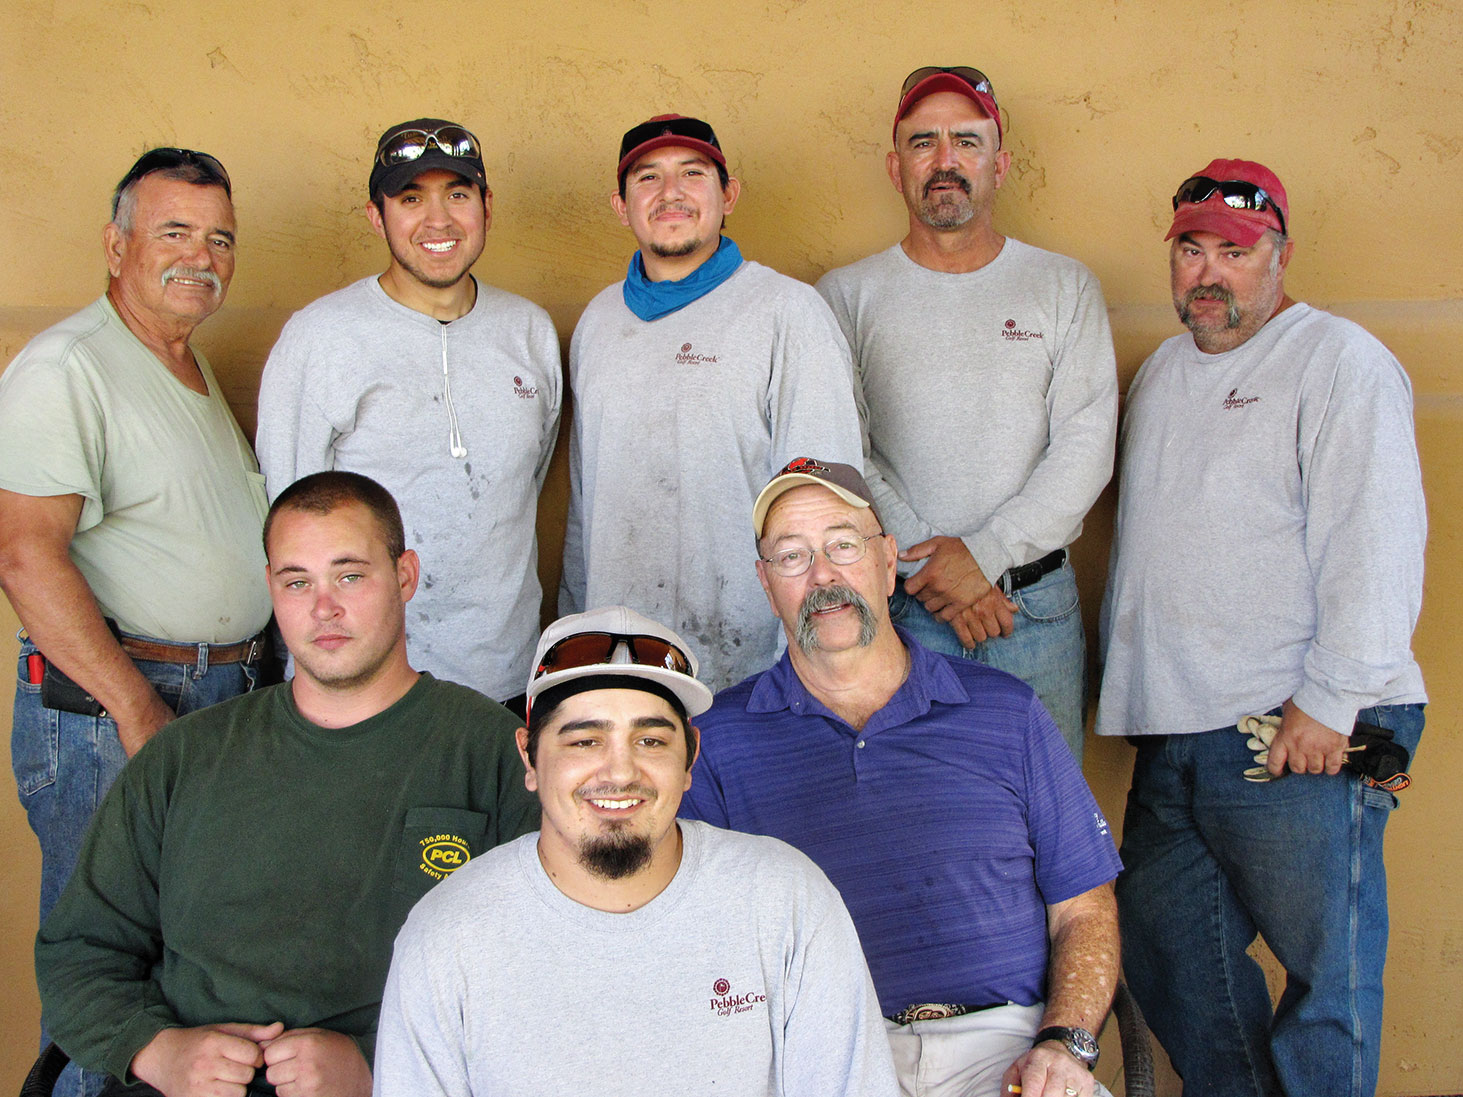 Ron Sawyer (seated on right) with some of his landscaping crew